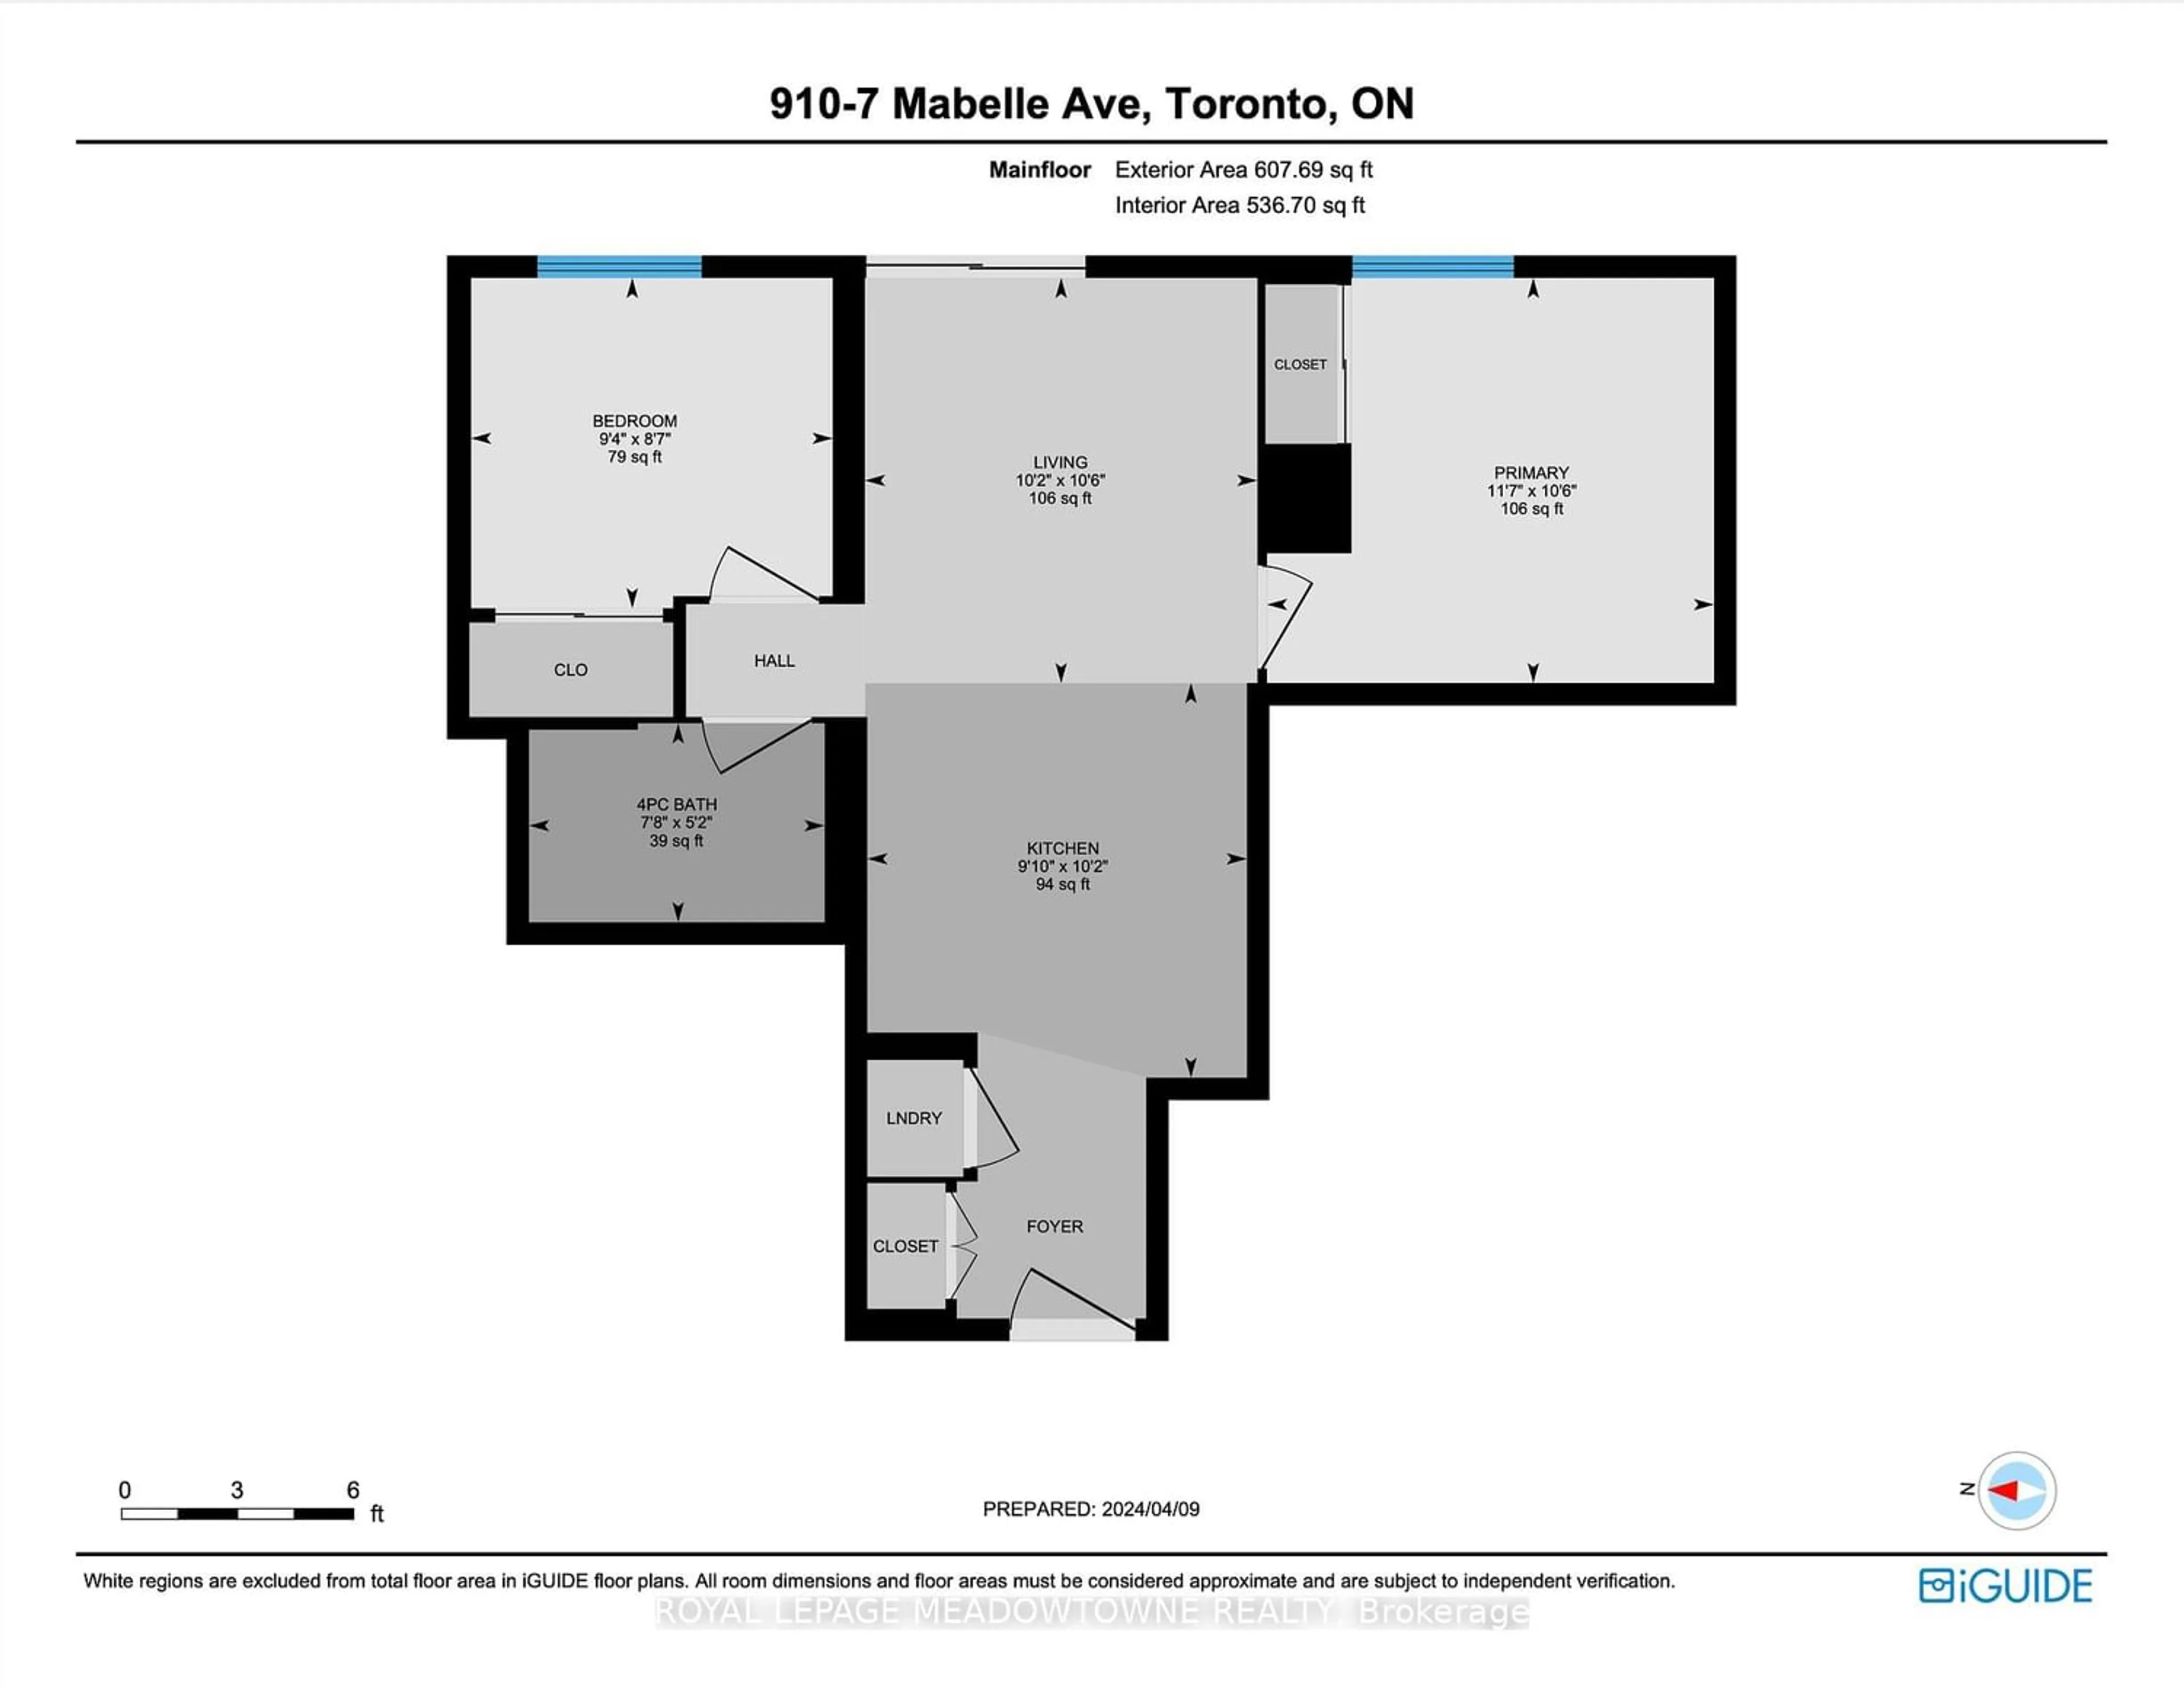 Floor plan for 7 Mabelle Ave #910, Toronto Ontario M9A 0C9